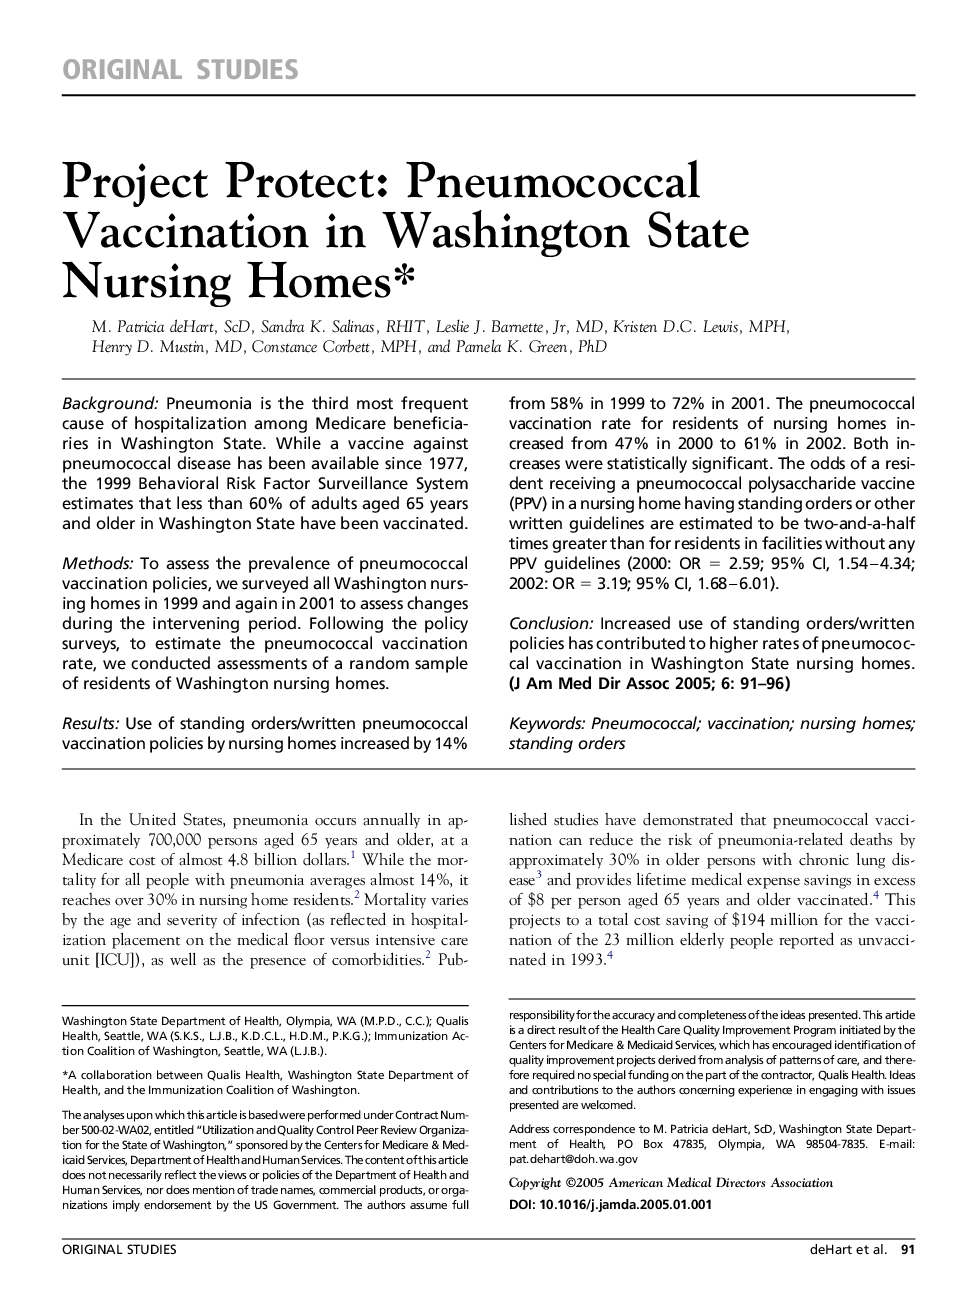 Project Protect: Pneumococcal vaccination in Washington State nursing homes*